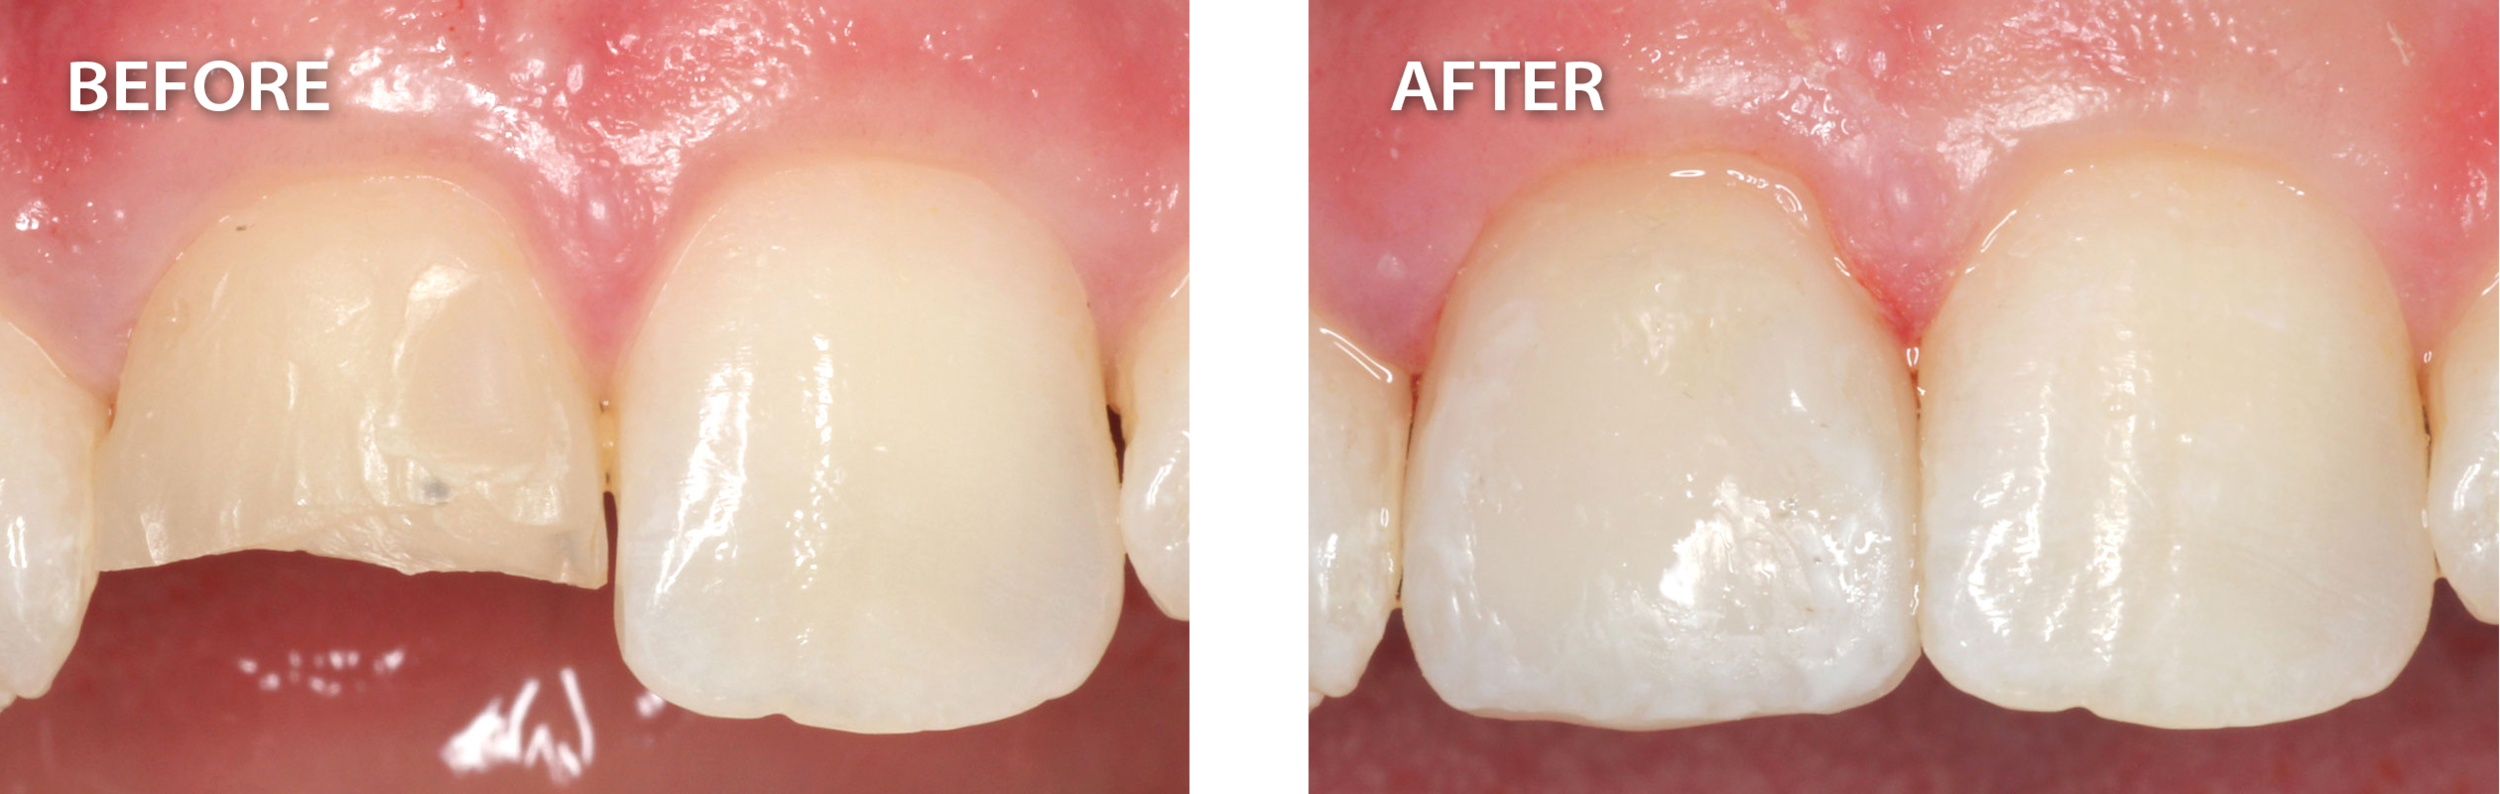  before picture of a broken tooth beside after image of that tooth now fixed from cerec dental procedure 